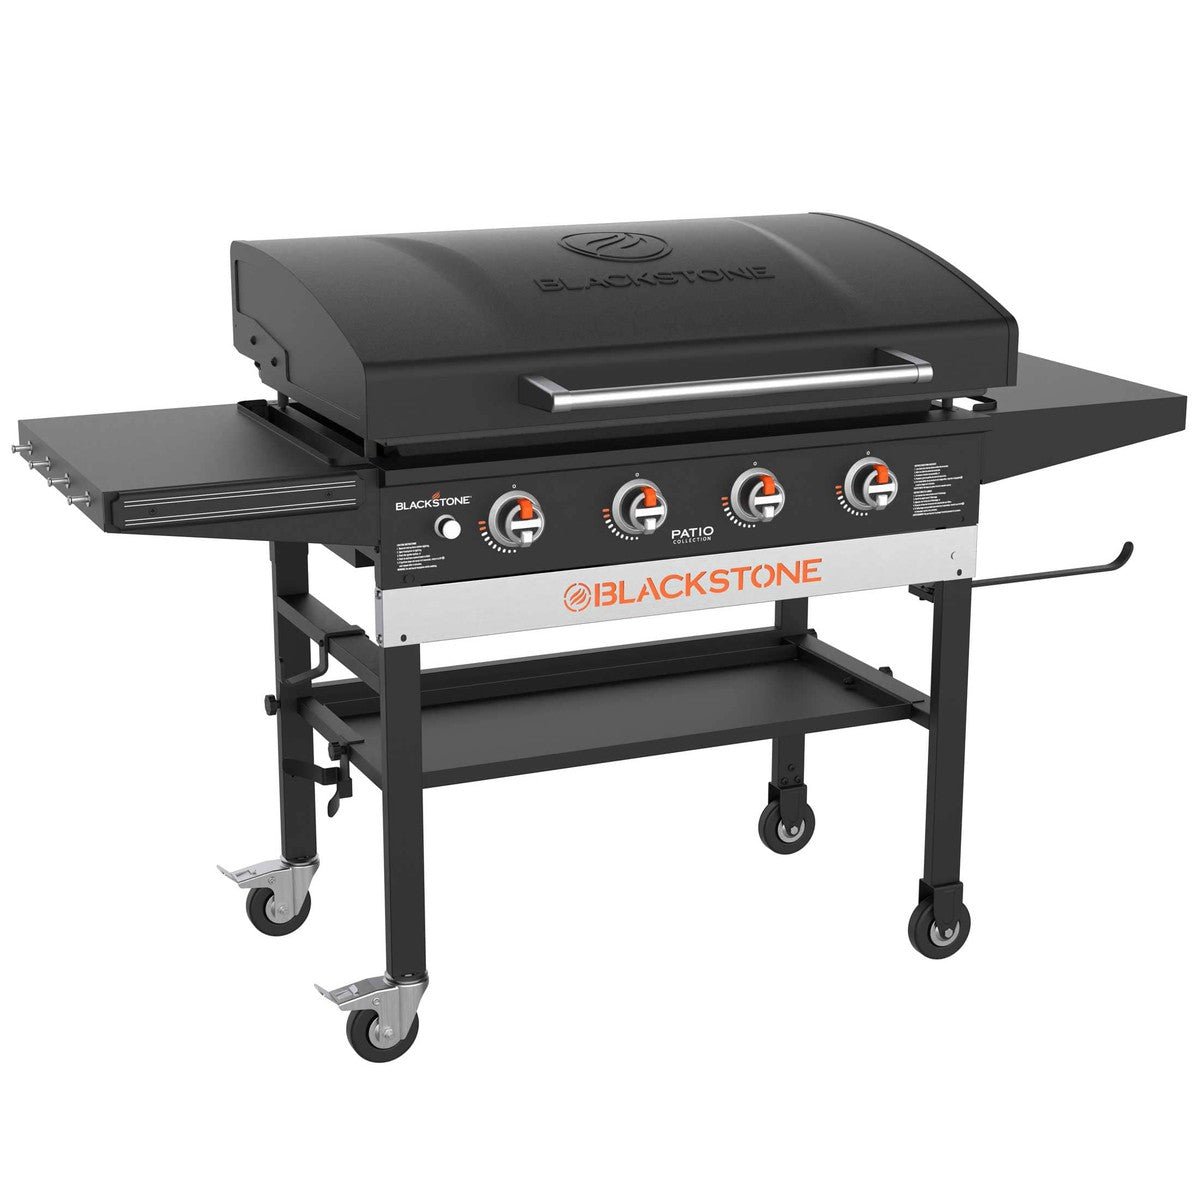 Blackstone Truck Freight - Not Qualified for Free Shipping Blackstone Patio 36" Cart Griddle with Hood Black #2102